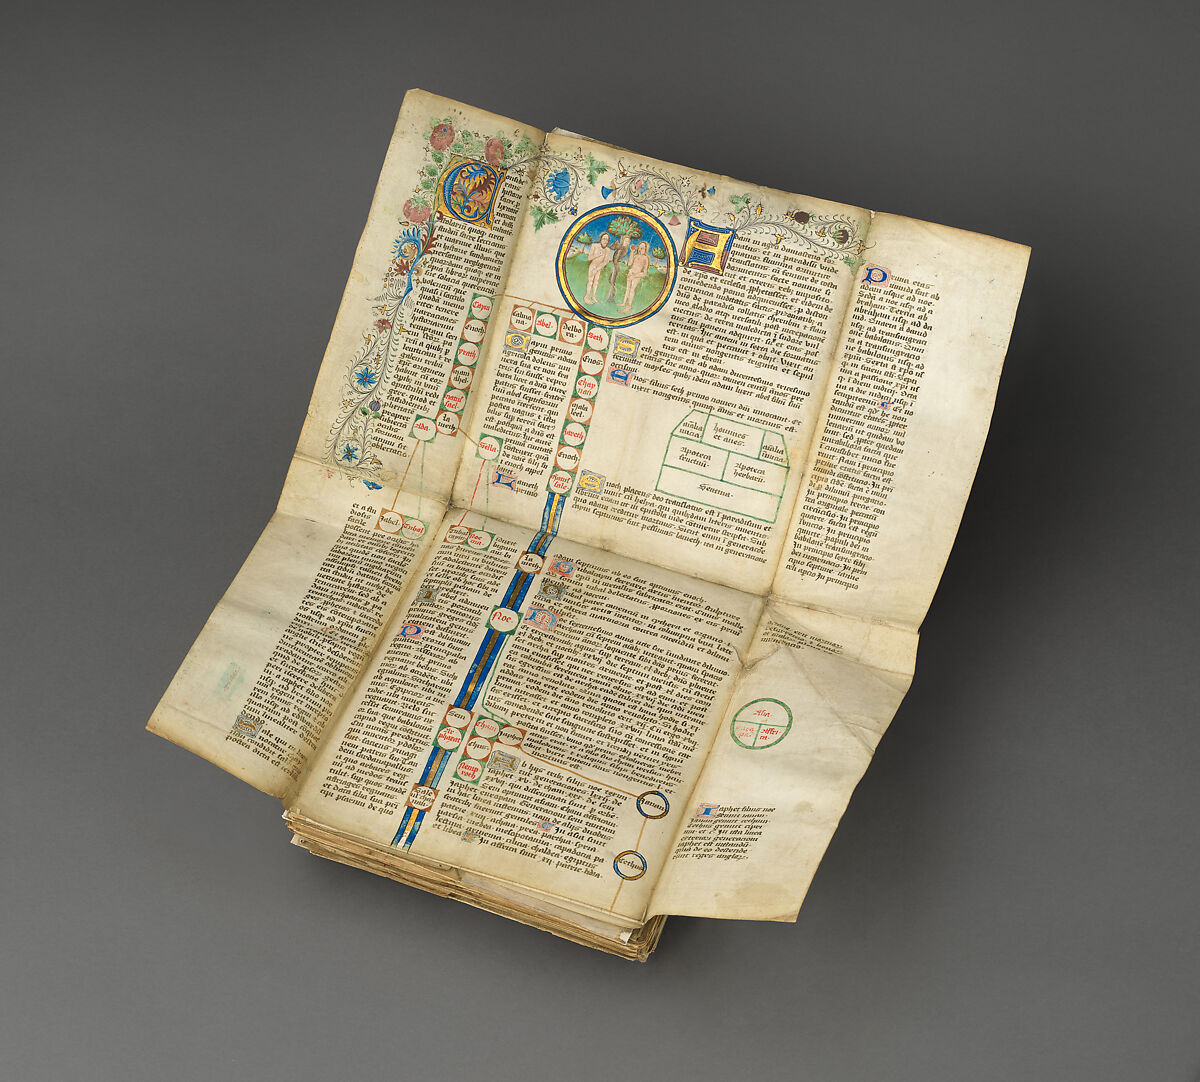 Genealogical Chronicle of the Kings of England, Opaque watercolor, ink, and gold on parchment, British